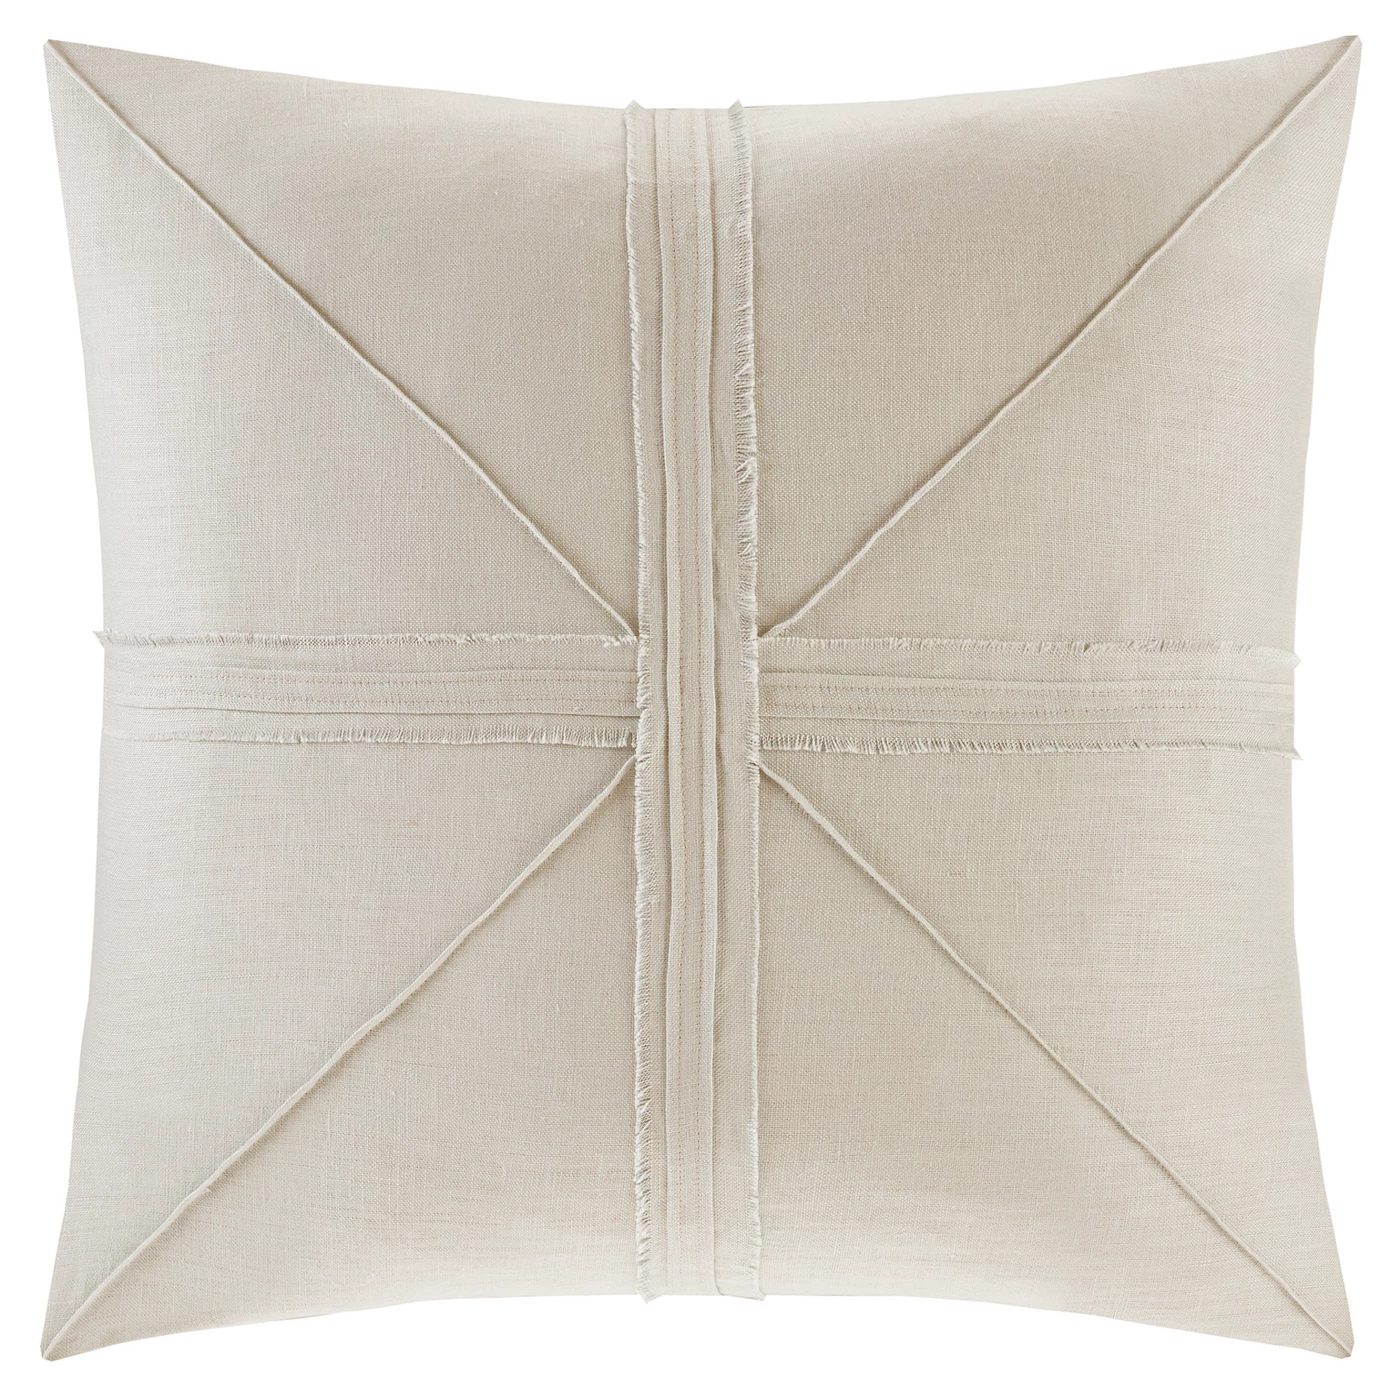 White Fifer Frayed Throw Pillow - image 1 of 3